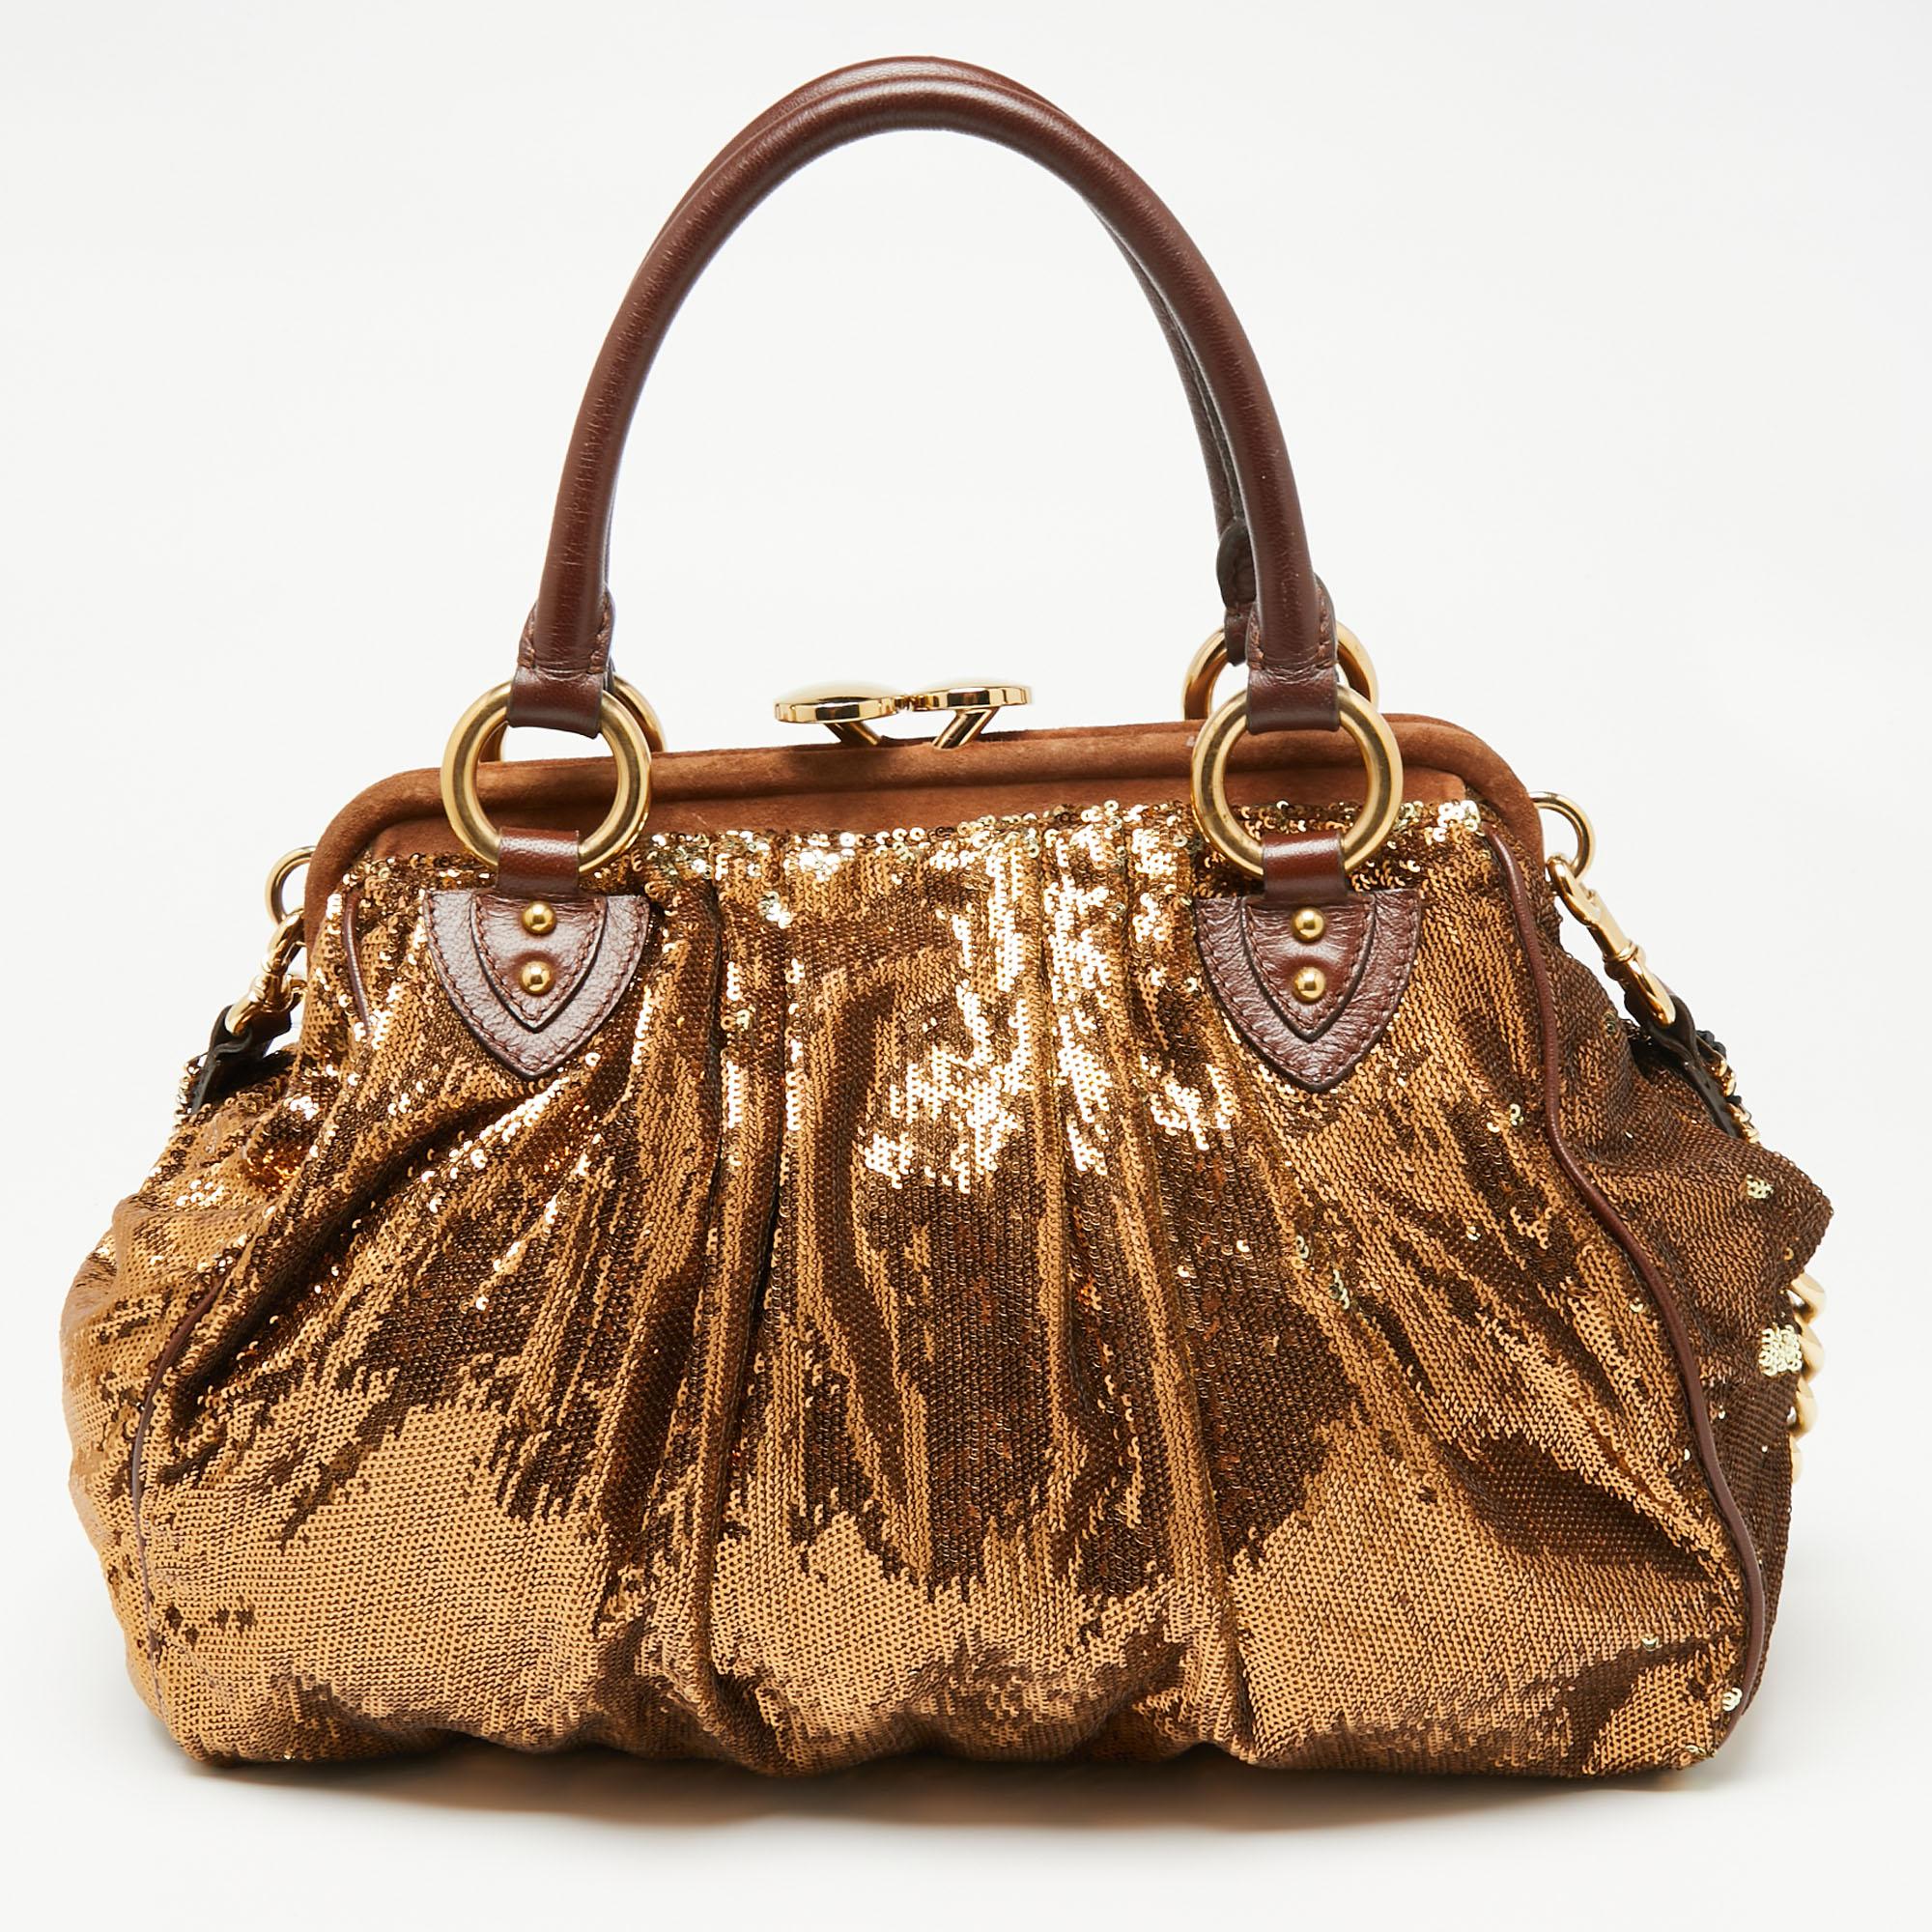 This Marc Jacobs design has a gleaming exterior covered in sequins and matched with gold-tone hardware, brown leather, and brown suede. The elegant Stam bag has a kiss-lock top closure, a satin interior, dual top handles, and a removable chain that